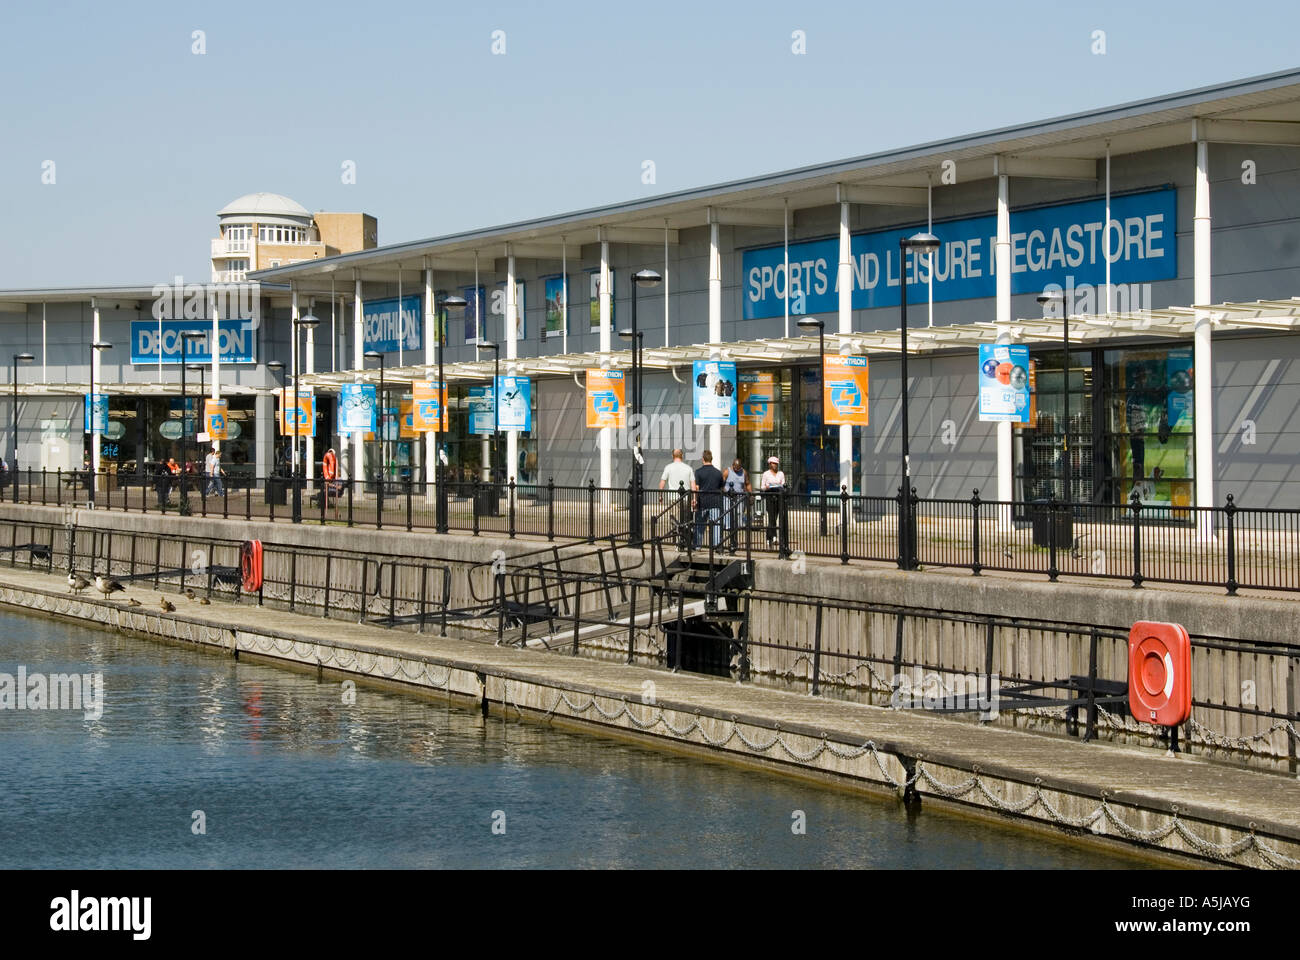 Decathlon retail business sports leisure shop store waterside location  pedestrian path note looped safety chains at waters edge Canada Water  London UK Stock Photo - Alamy